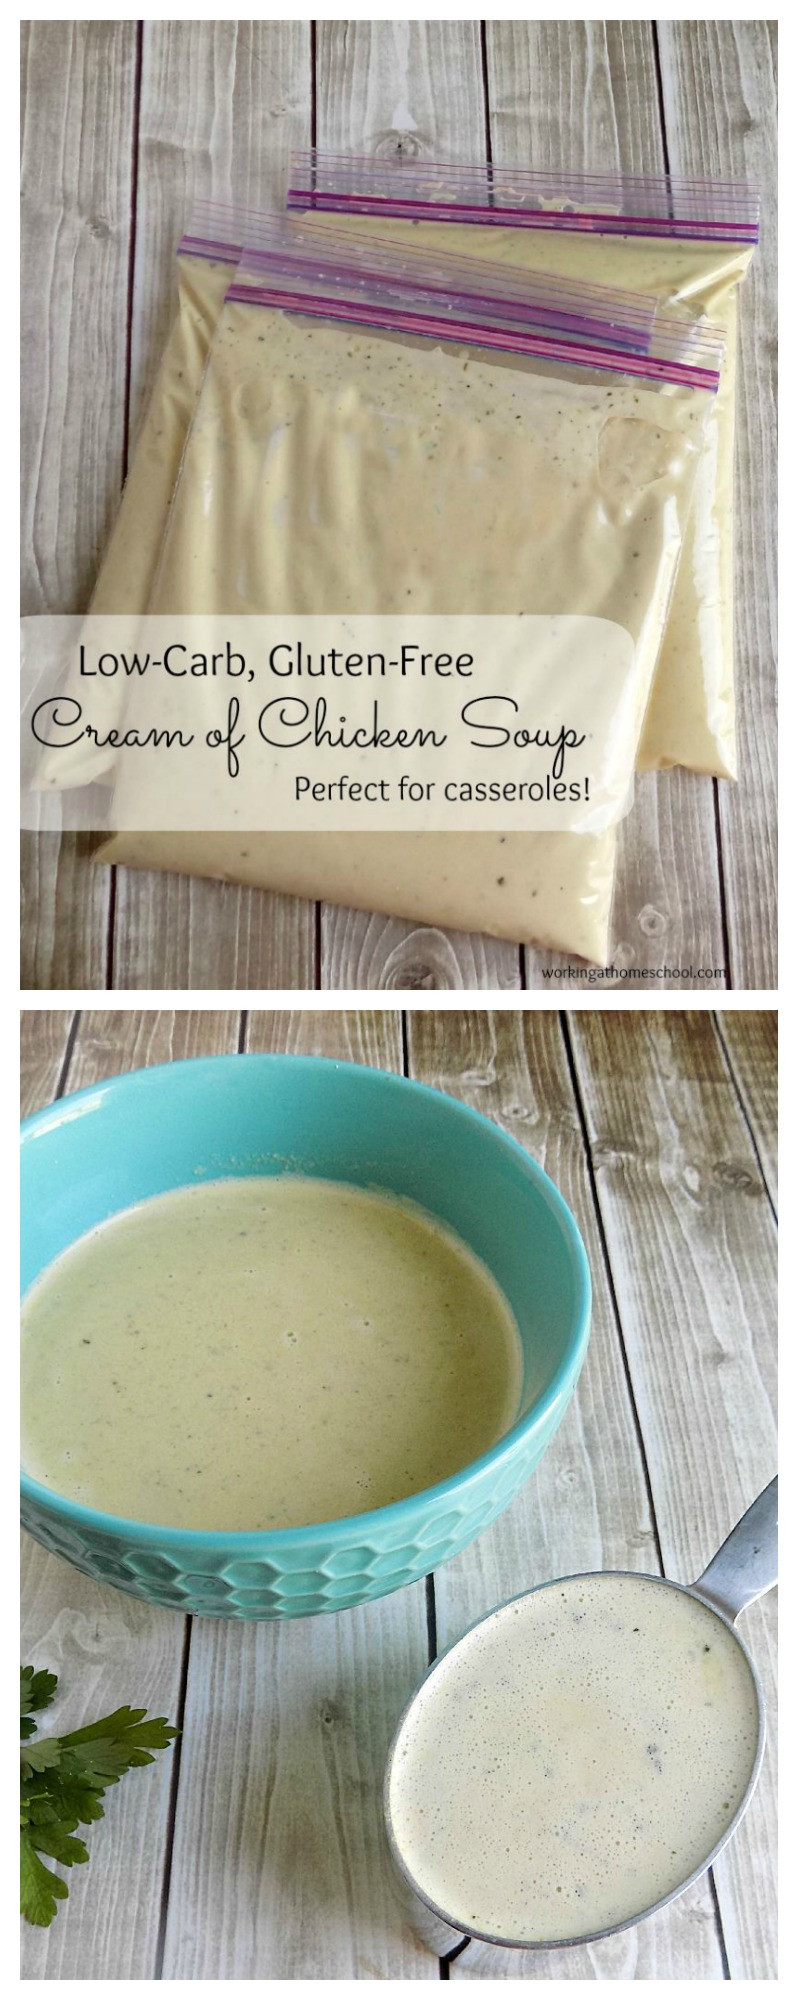 Low Carb Cream Of Chicken Soup
 low carb cream of chicken soup recipe